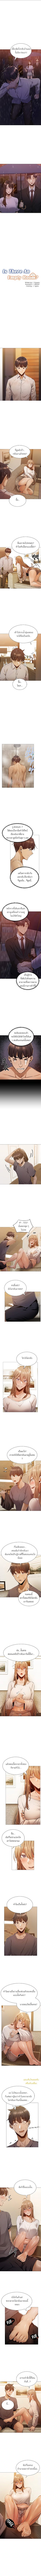 Is There an Empty Room? - หน้า 2